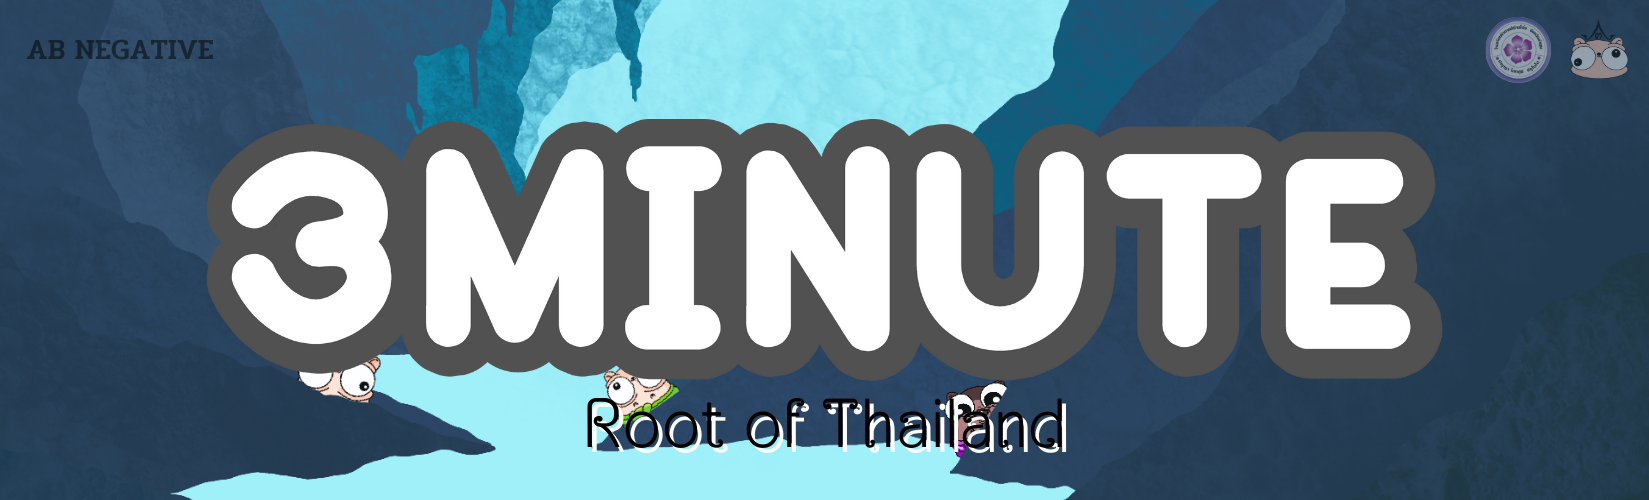 3 Minute Root of Thailand